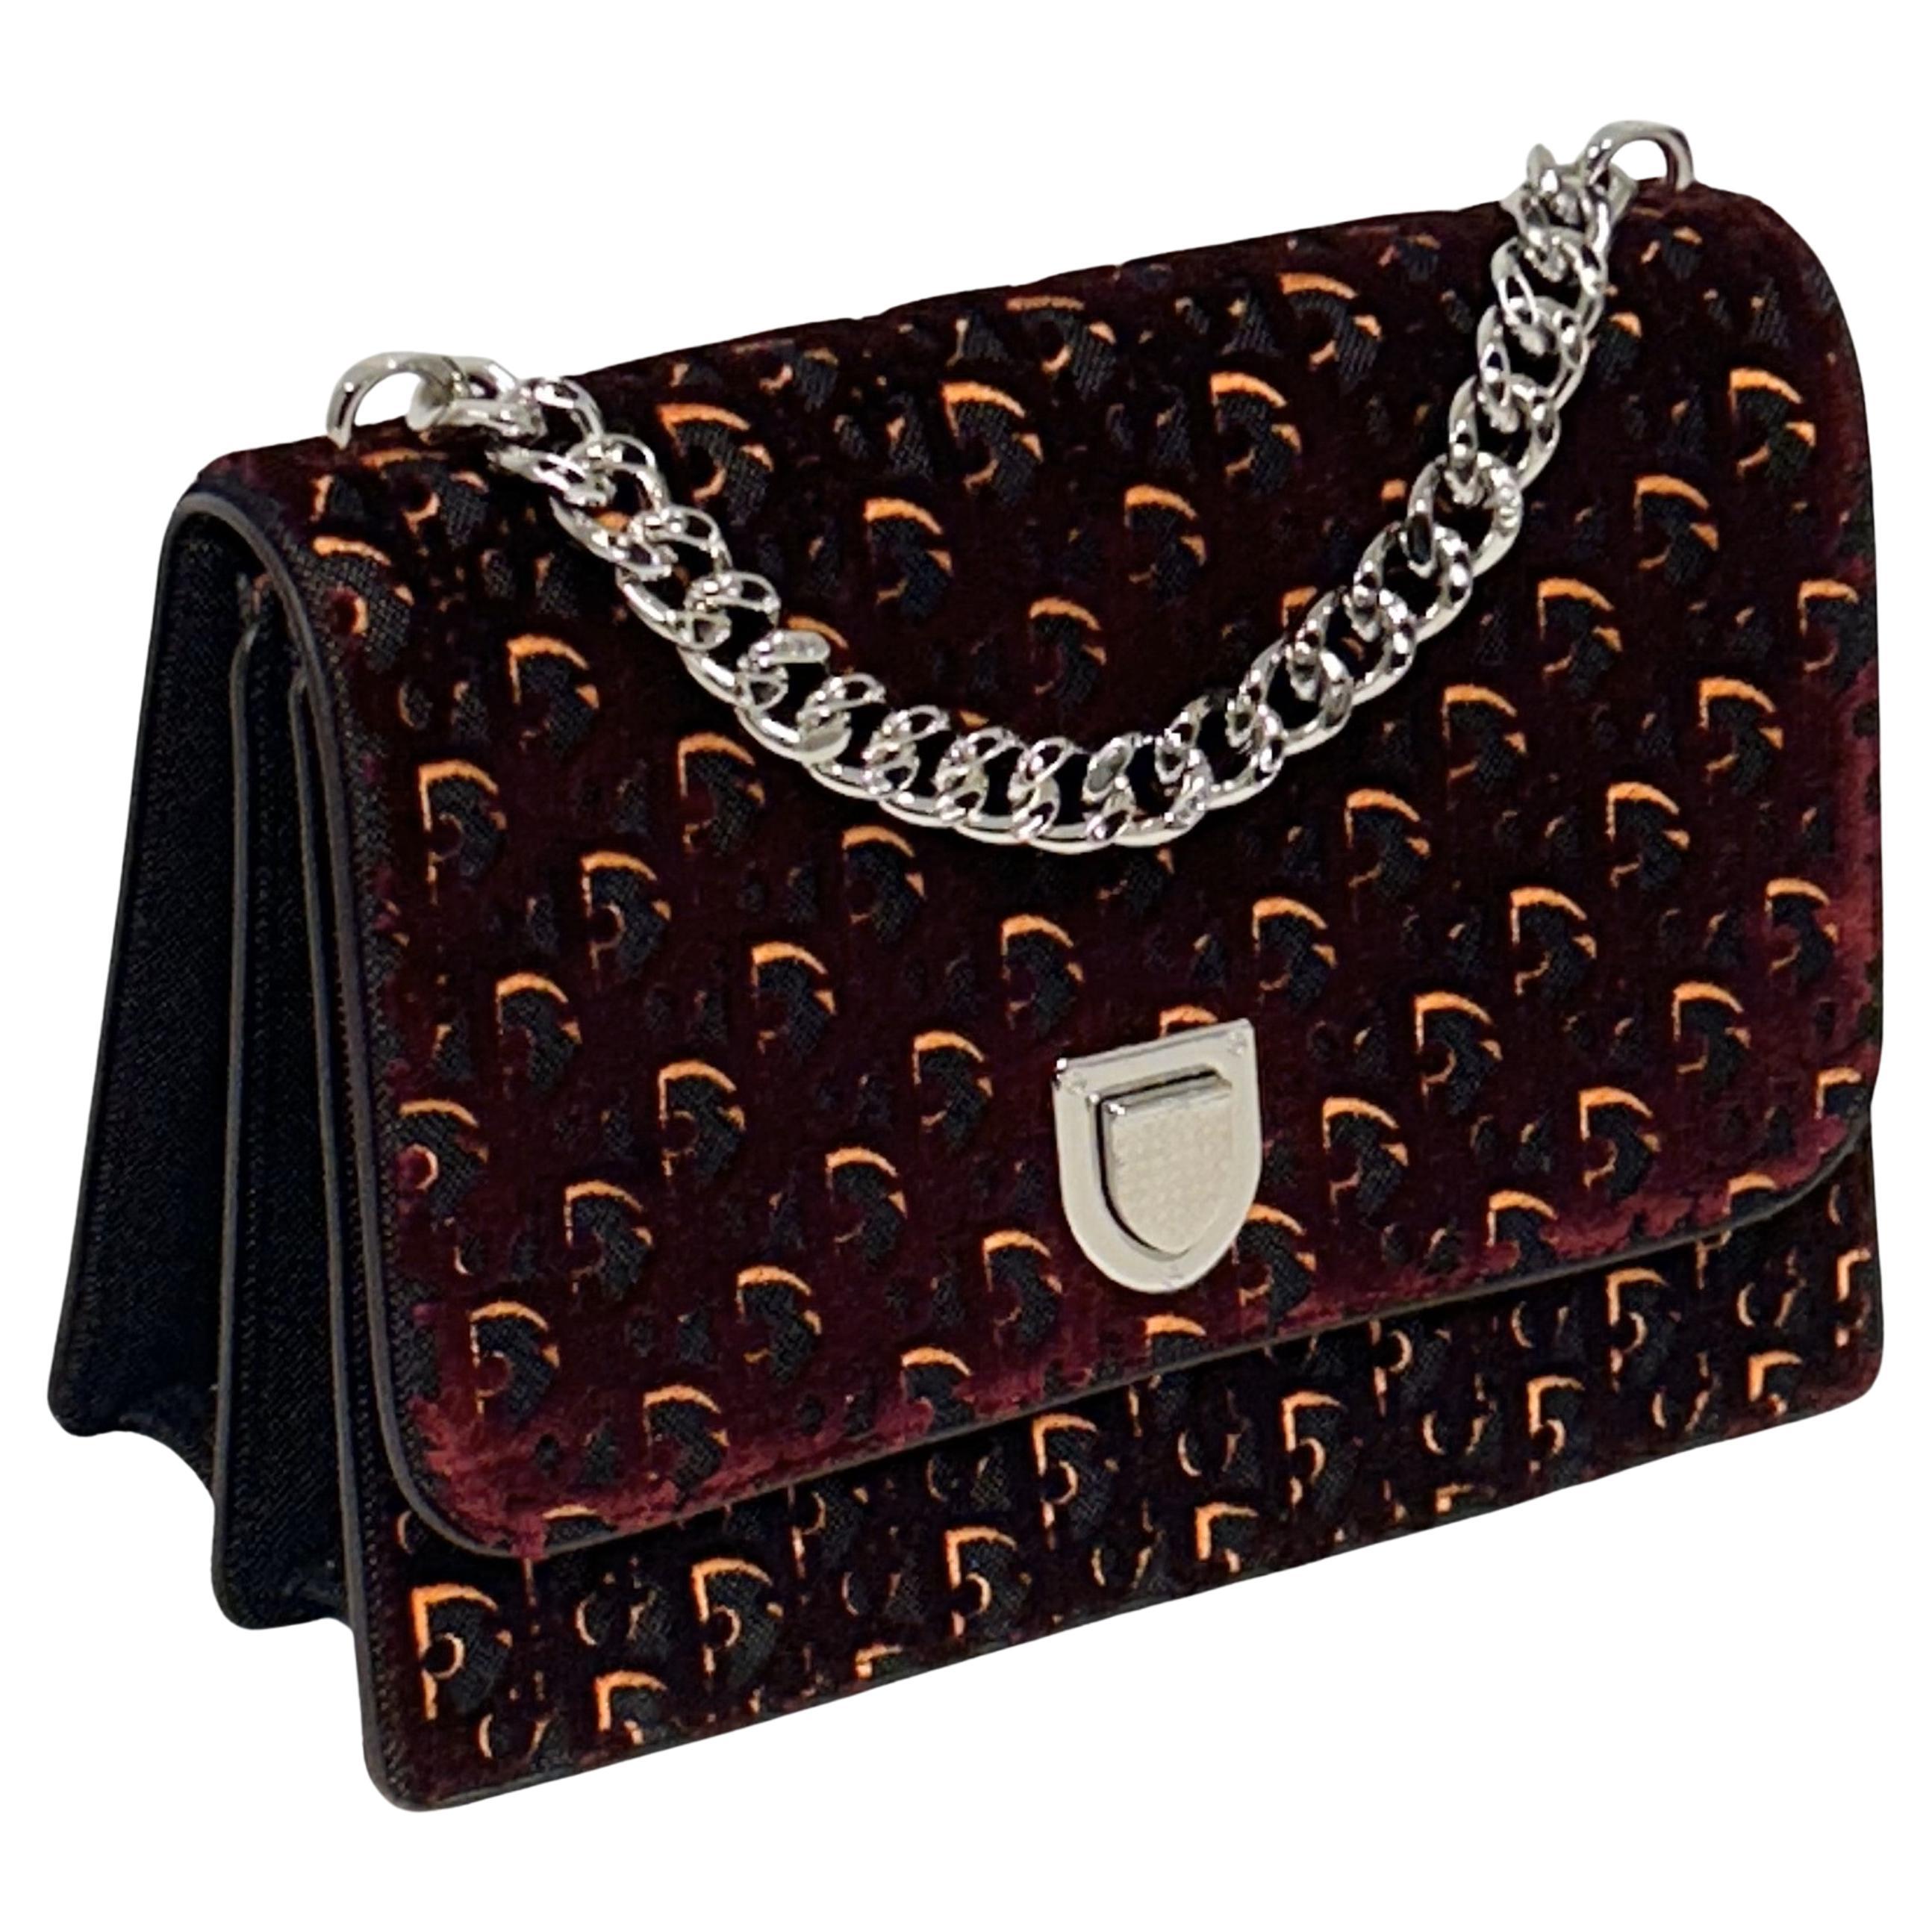 New Bag
Monogram Dior in neon orange , burgundy and black 
Silver top handle chain
Optional cross body strap 
Flap bag with 3 internal compartments ( one zipppered)
Approximate release 2019 
11 wide by 8 high 
cross body strap 19 inches 
